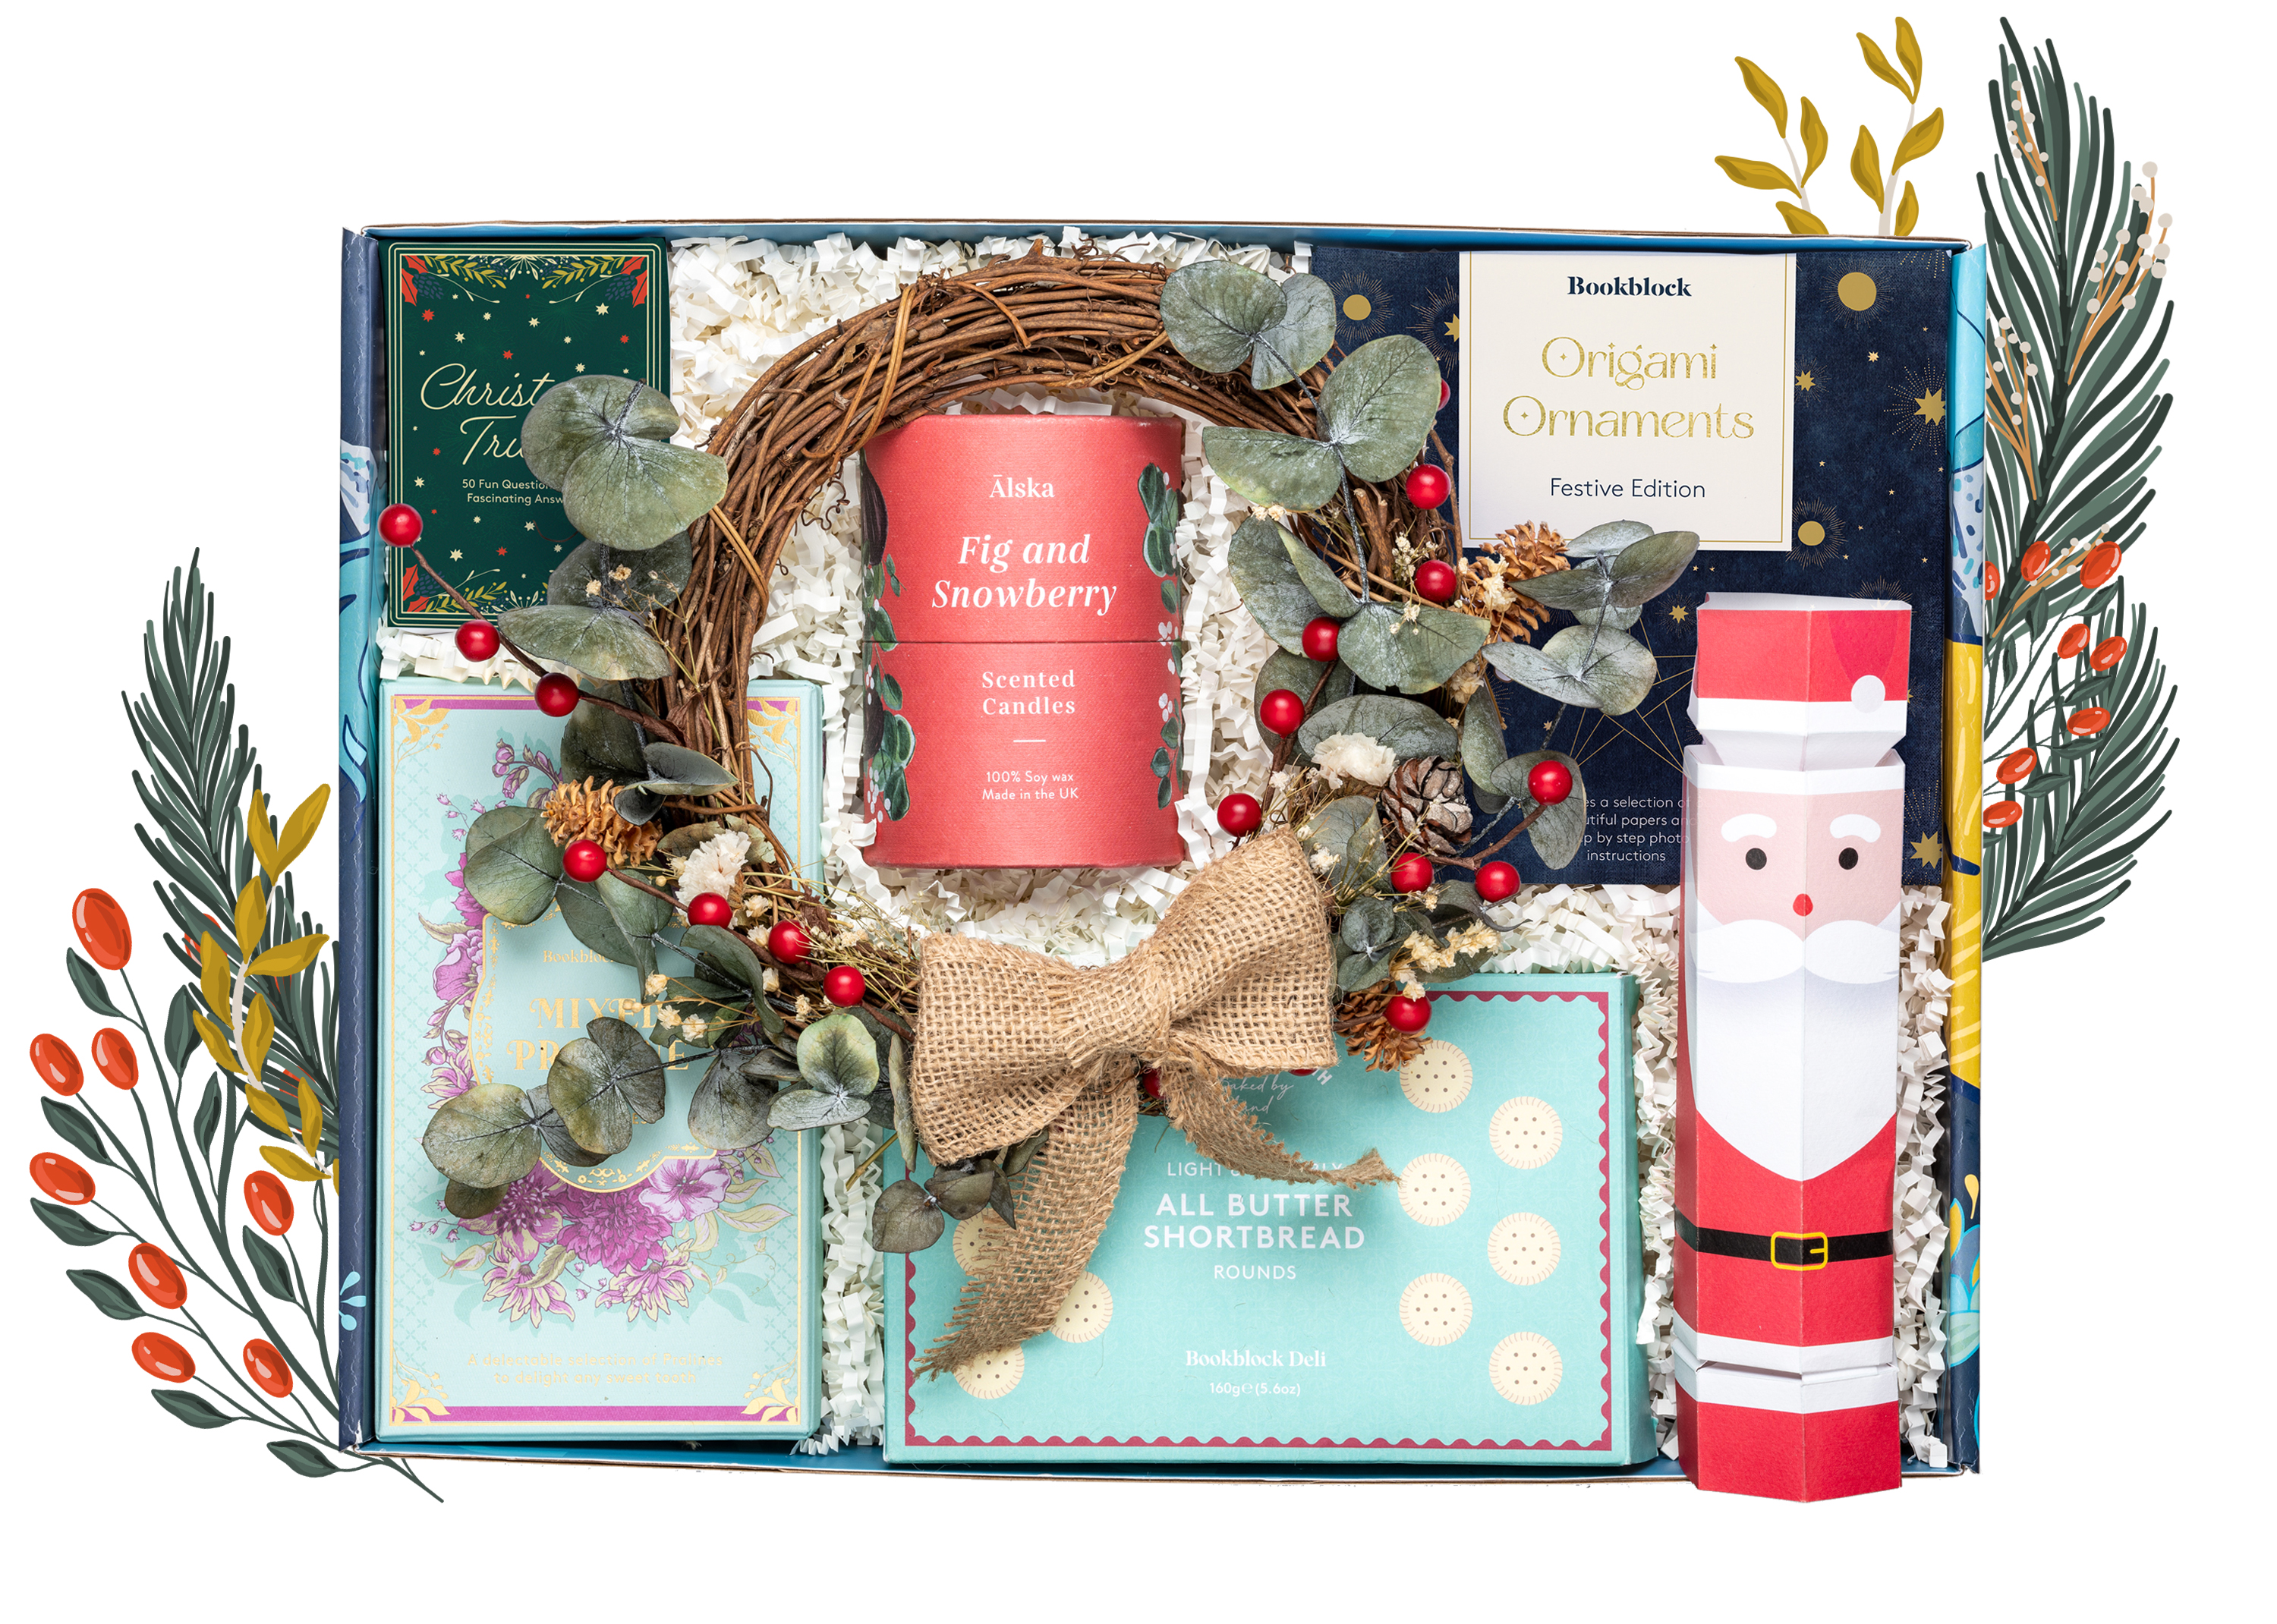 Family Christmas box with festive leaf decorations in red, green and gold